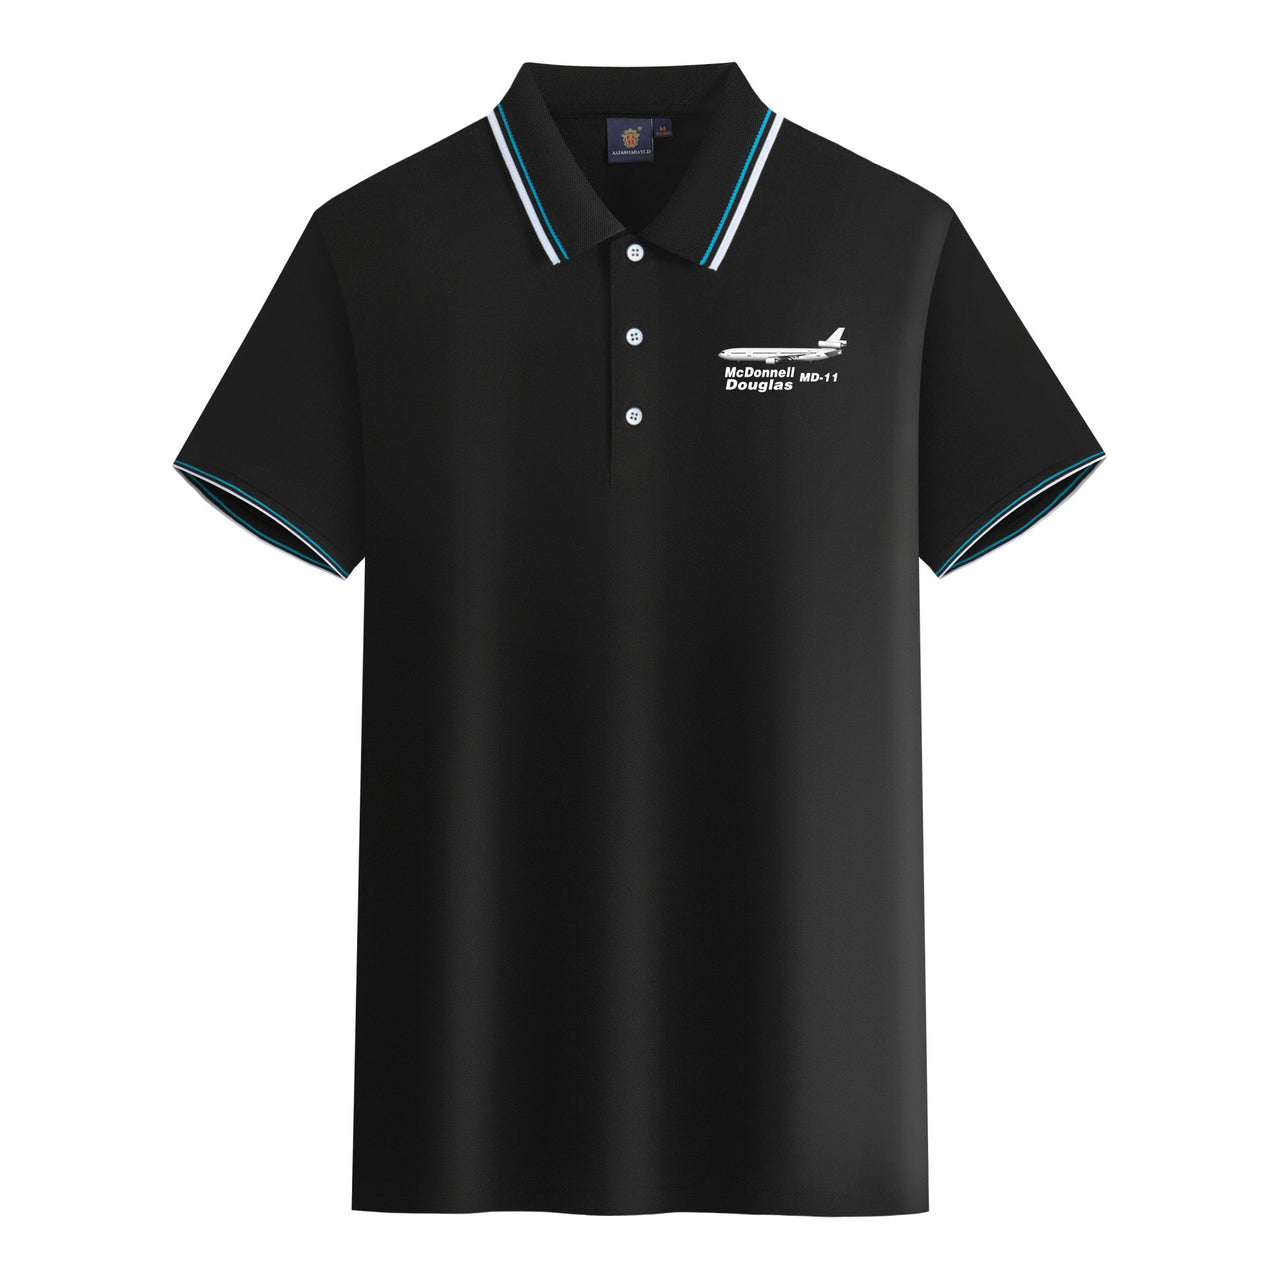 The McDonnell Douglas MD-11 Designed Stylish Polo T-Shirts